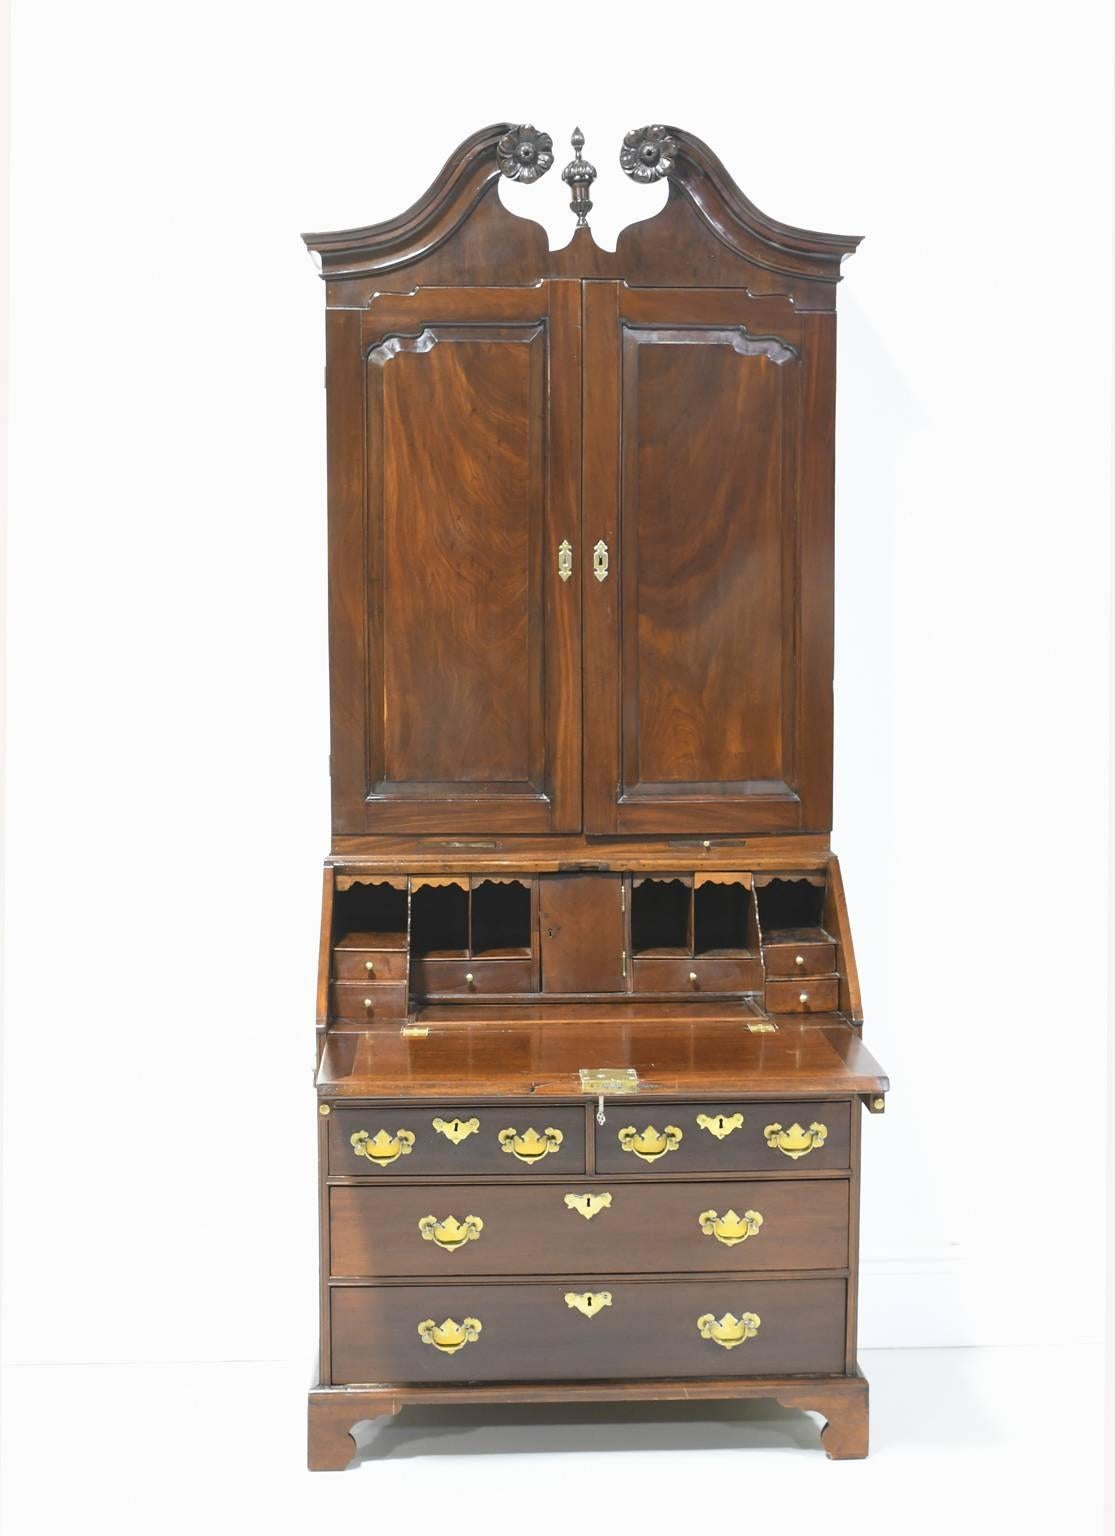 A fine 18th century George III English bureau bookcase secretary in solid West Indies/ Cuban mahogany. The bonnet features a swan neck, broken-scroll pediment with carved rosettes and a center finial. Upper solid door panels are raised and interior